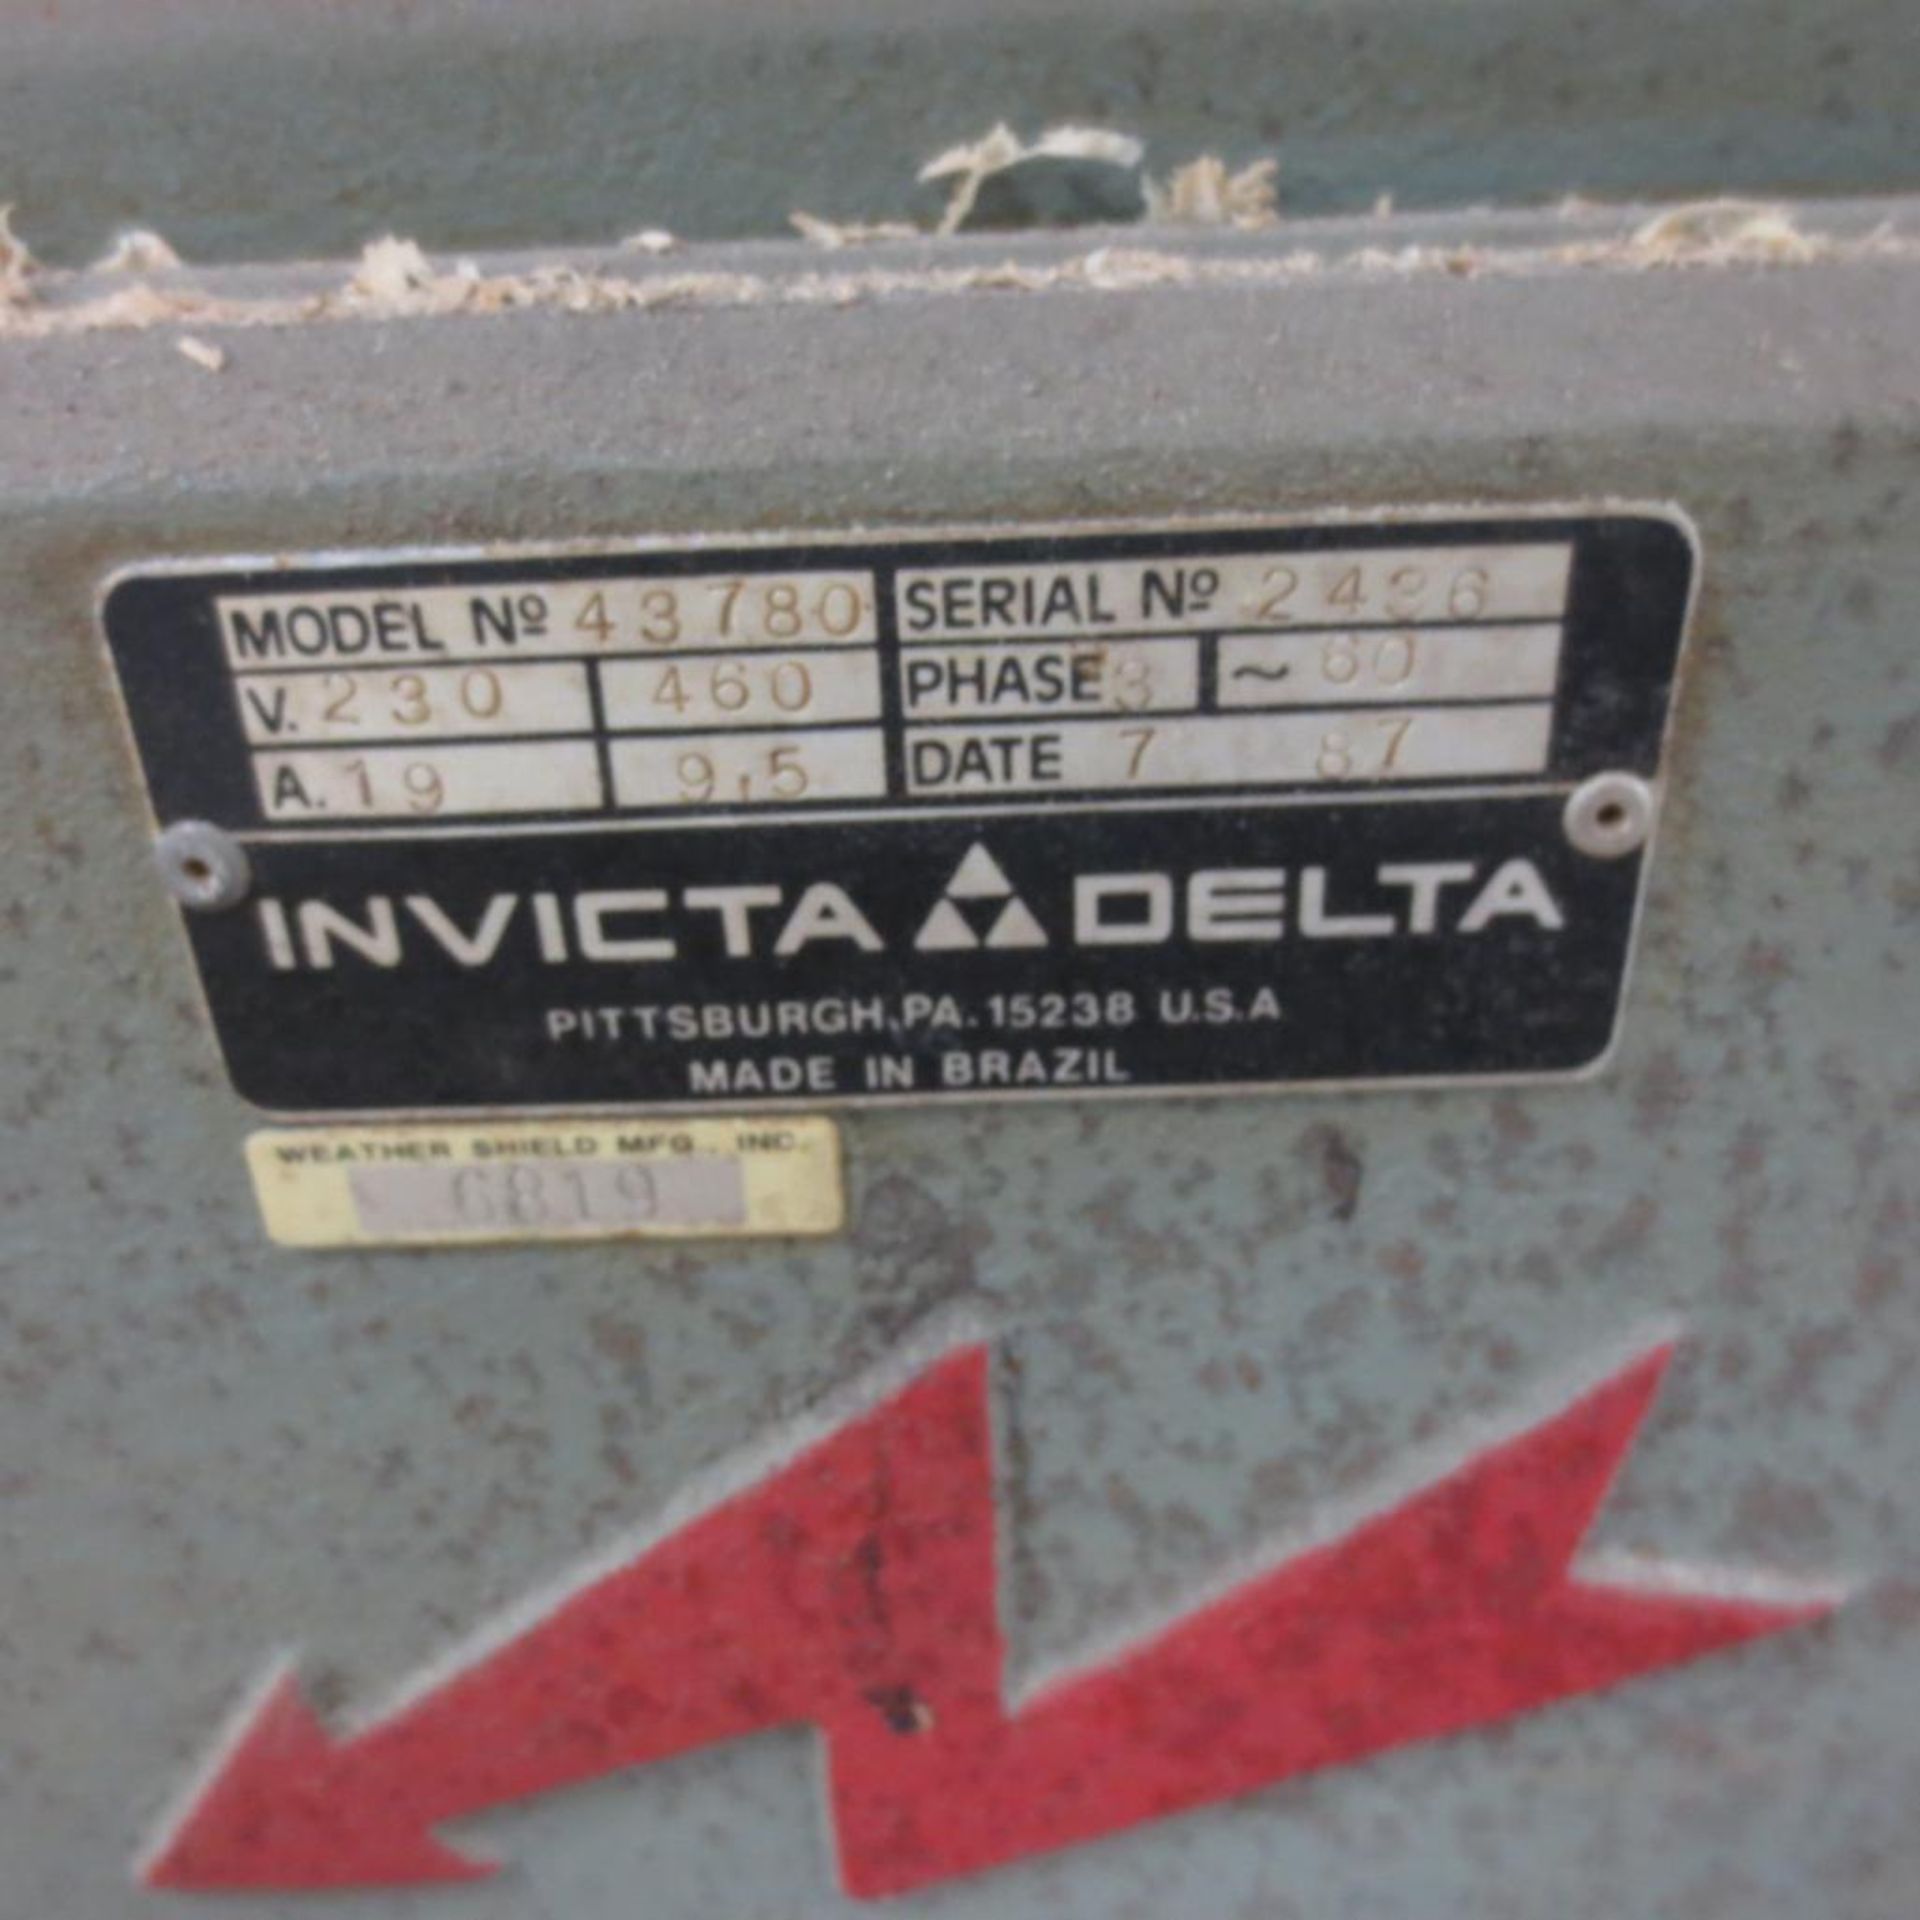 Invicta Delta RS 15 Model 43780 Single Spindle Shaper S/N: 2436 W/ Stegherr Model BV Table-Mounted F - Image 3 of 6